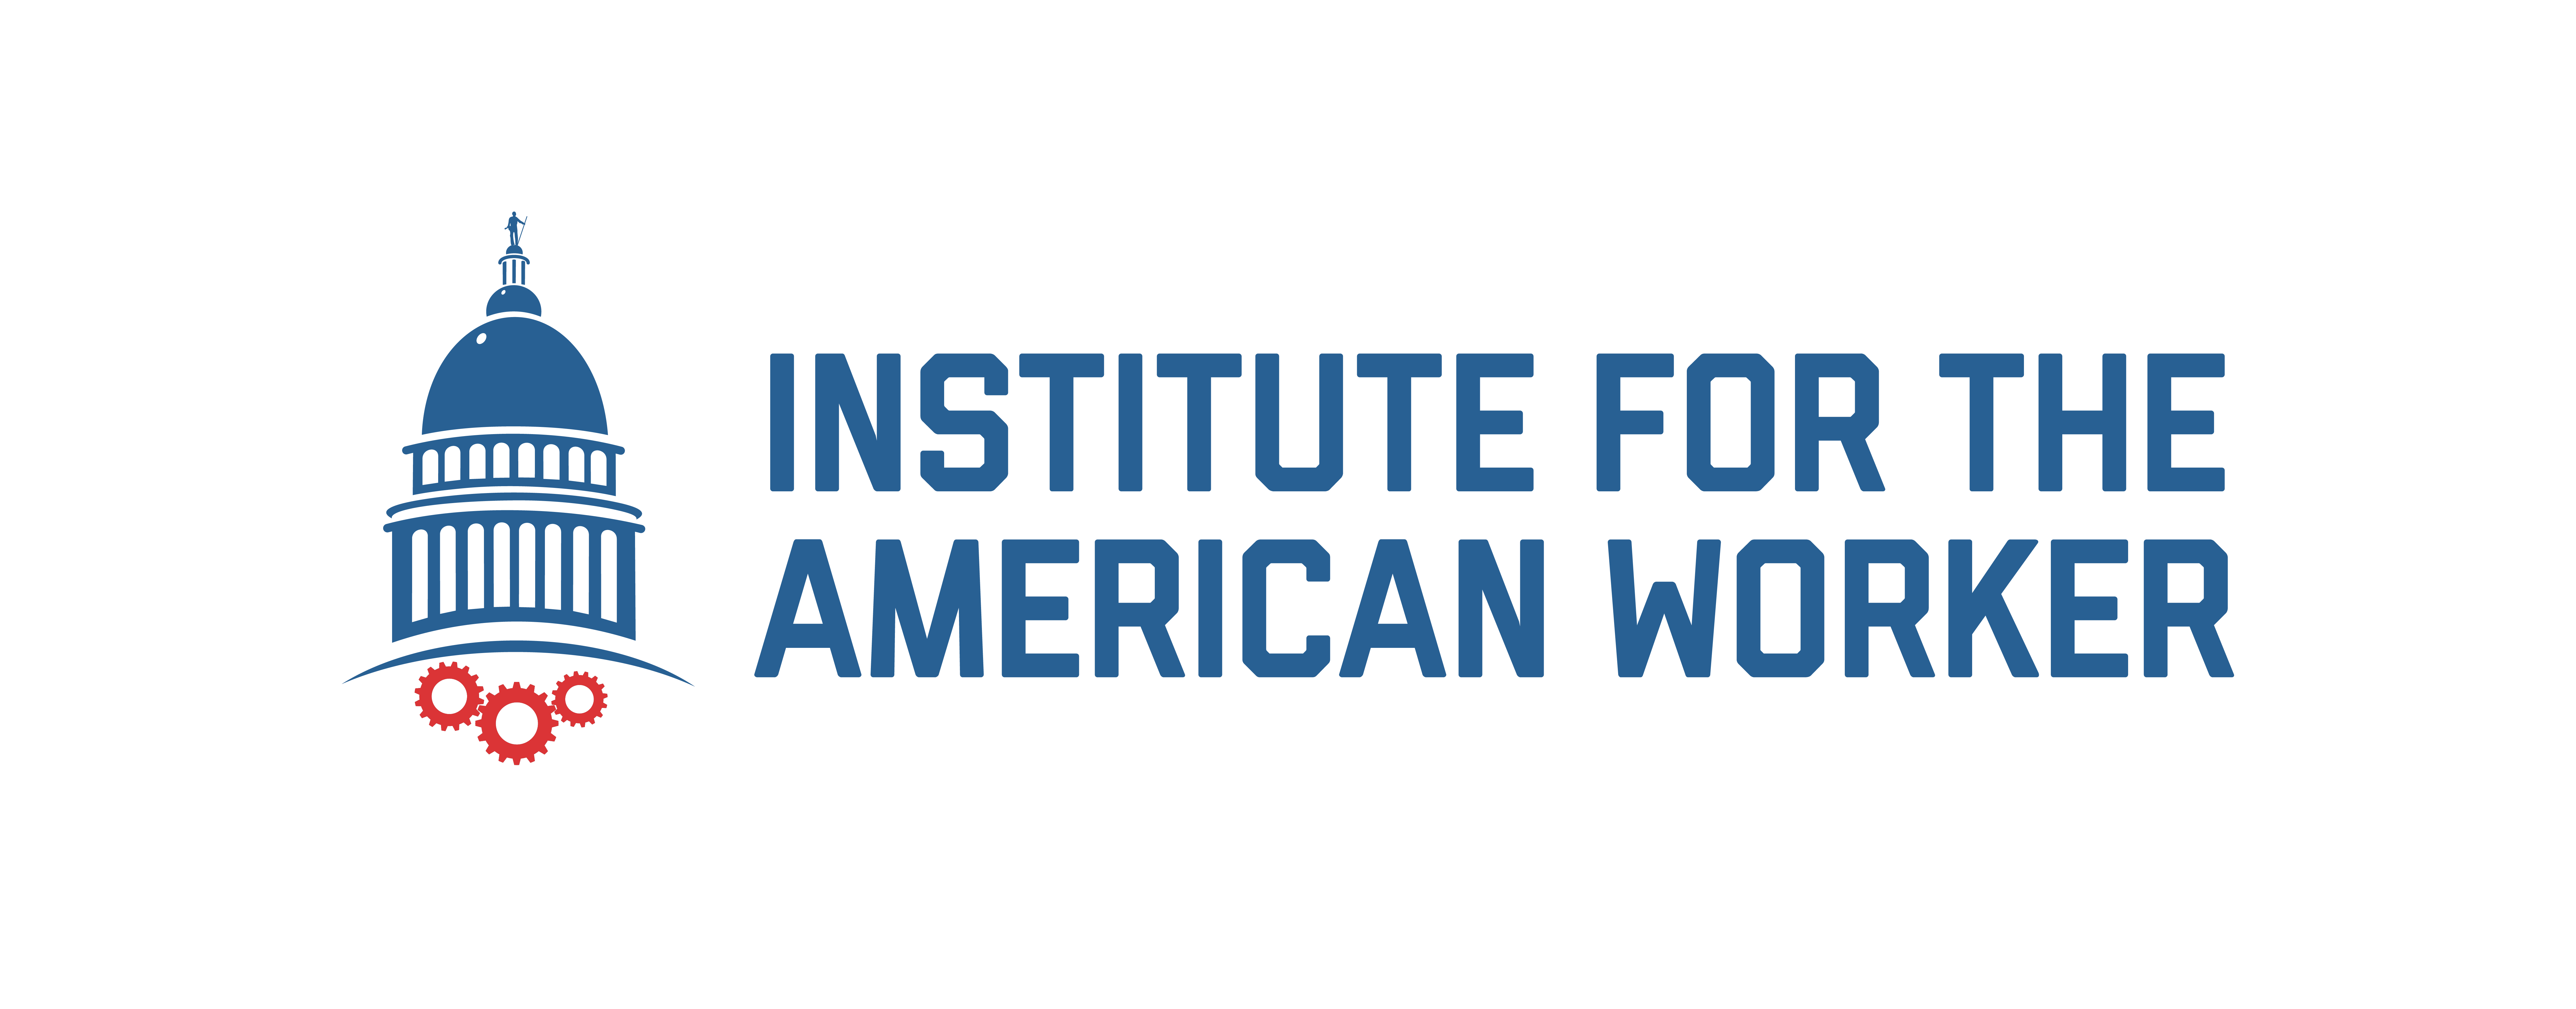 The Institute for the American Worker